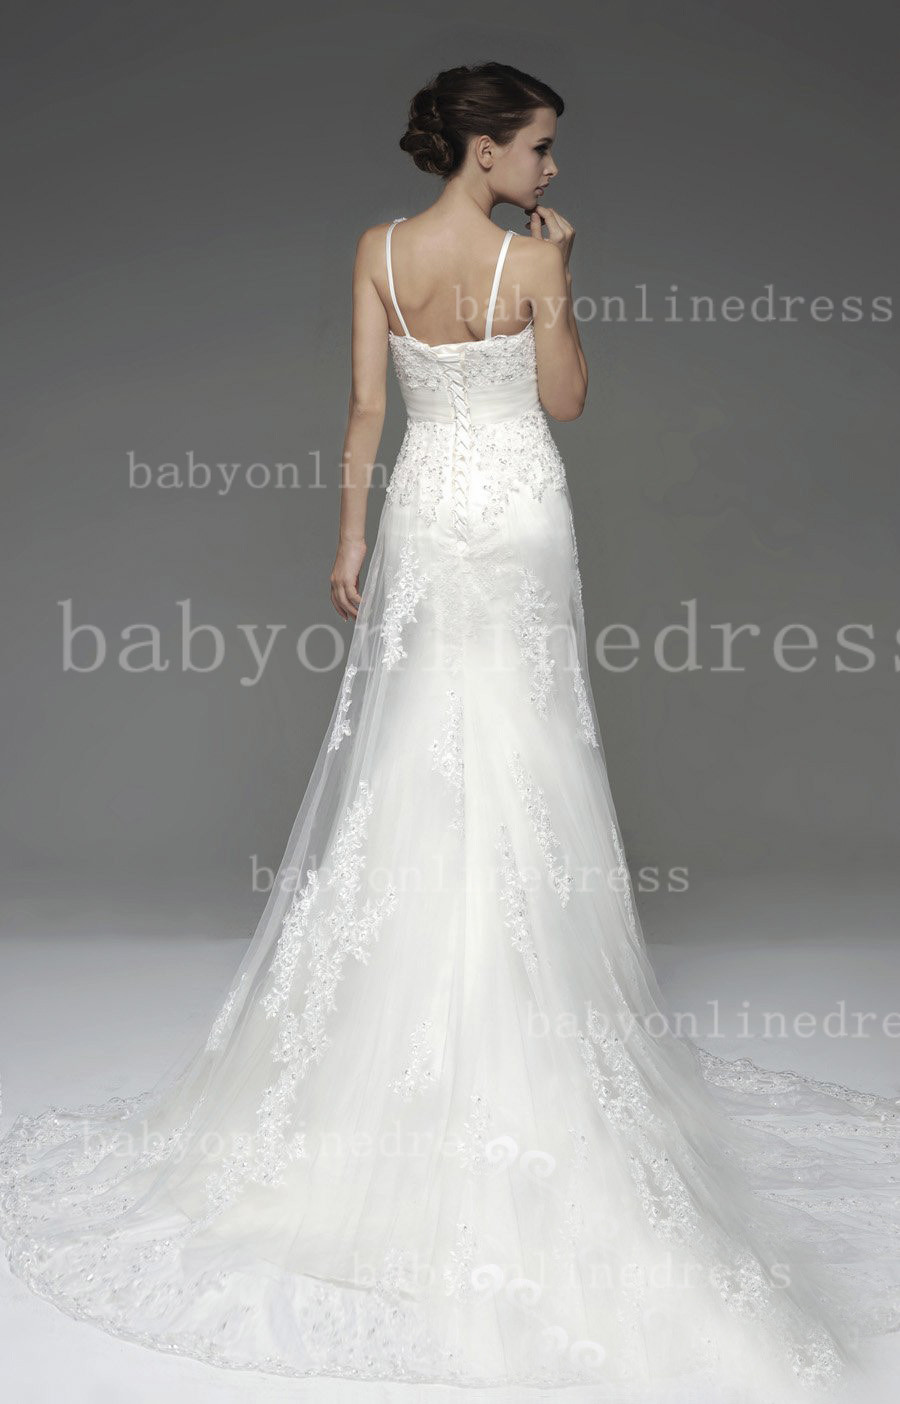 Cheap Wedding Gowns For Sale
 Very Cheap Tulle Lace Wedding Dresses for Sale 2014 Straps